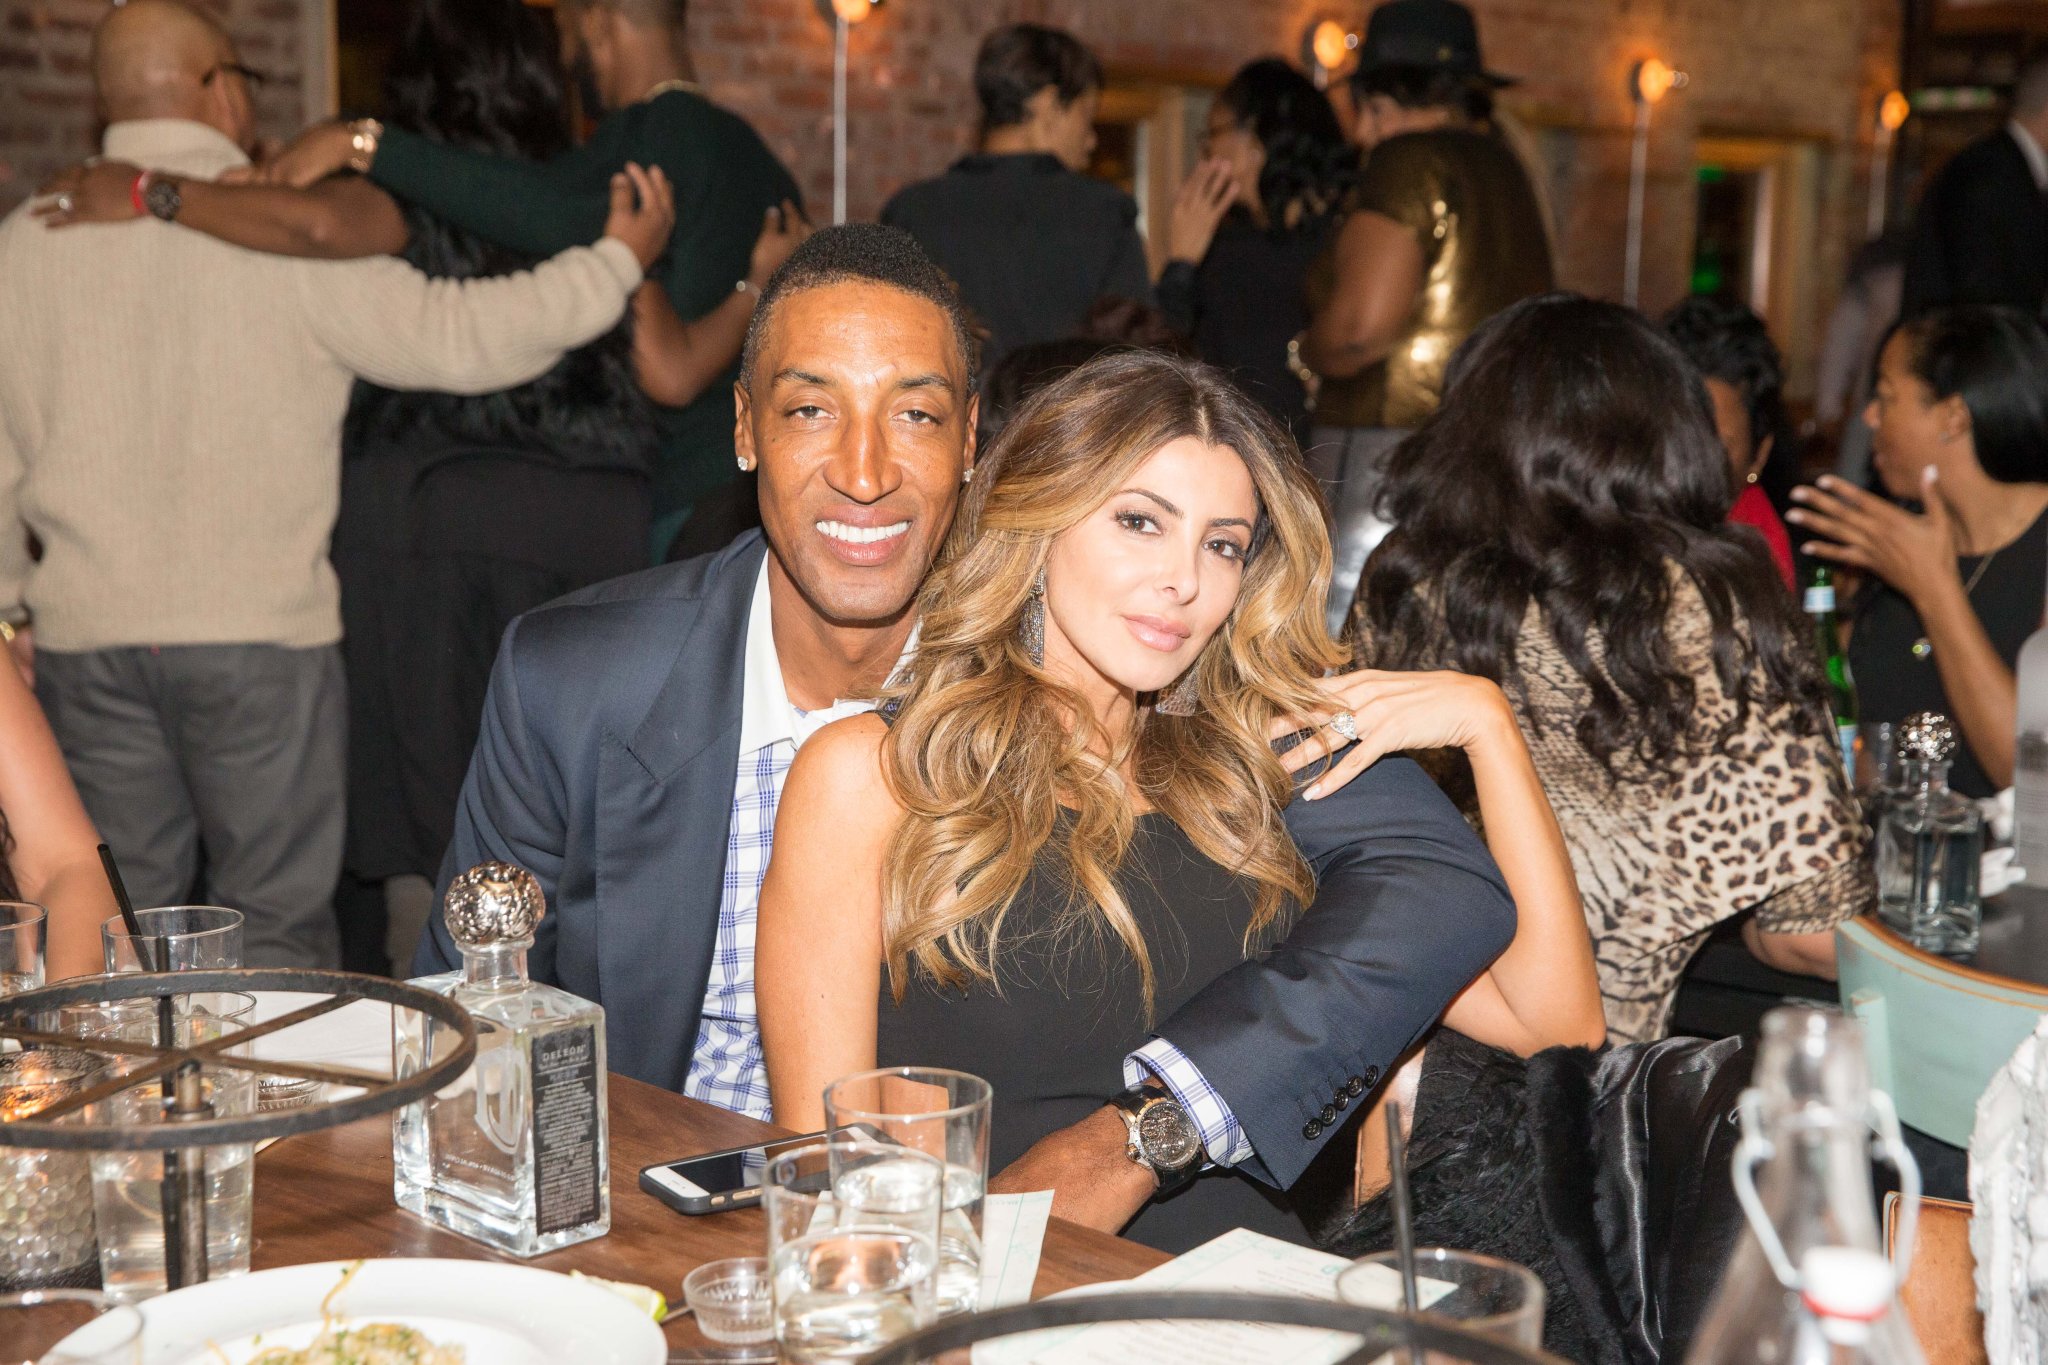 Larsa Pippen Shades Scottie In Response To Instagram Trolls Who Accused Her Of Doing Him Dirty